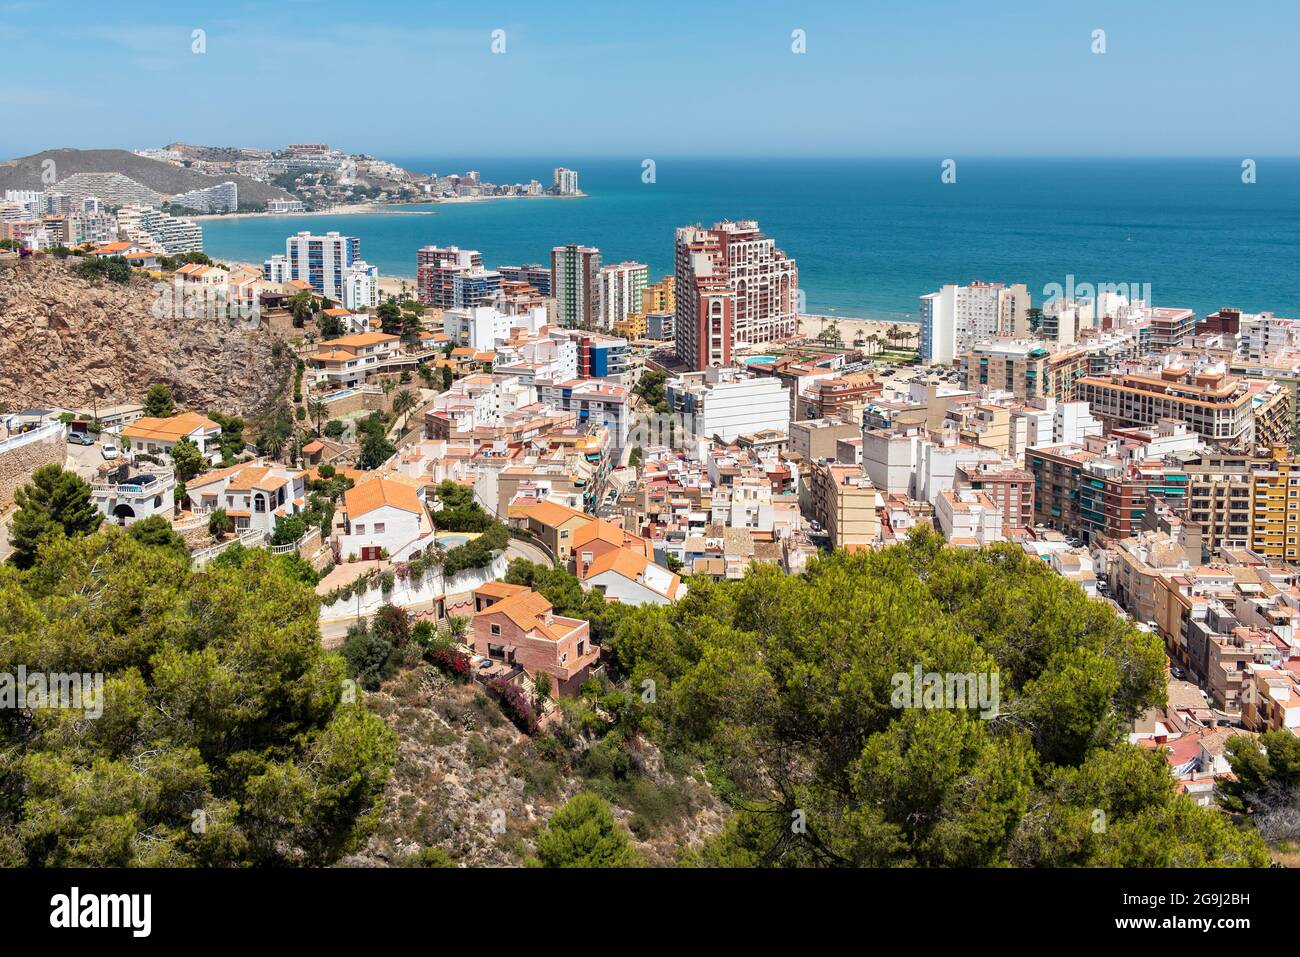 Panoramic view of seaside town of Cullera from the Castle, Spain Stock Photo